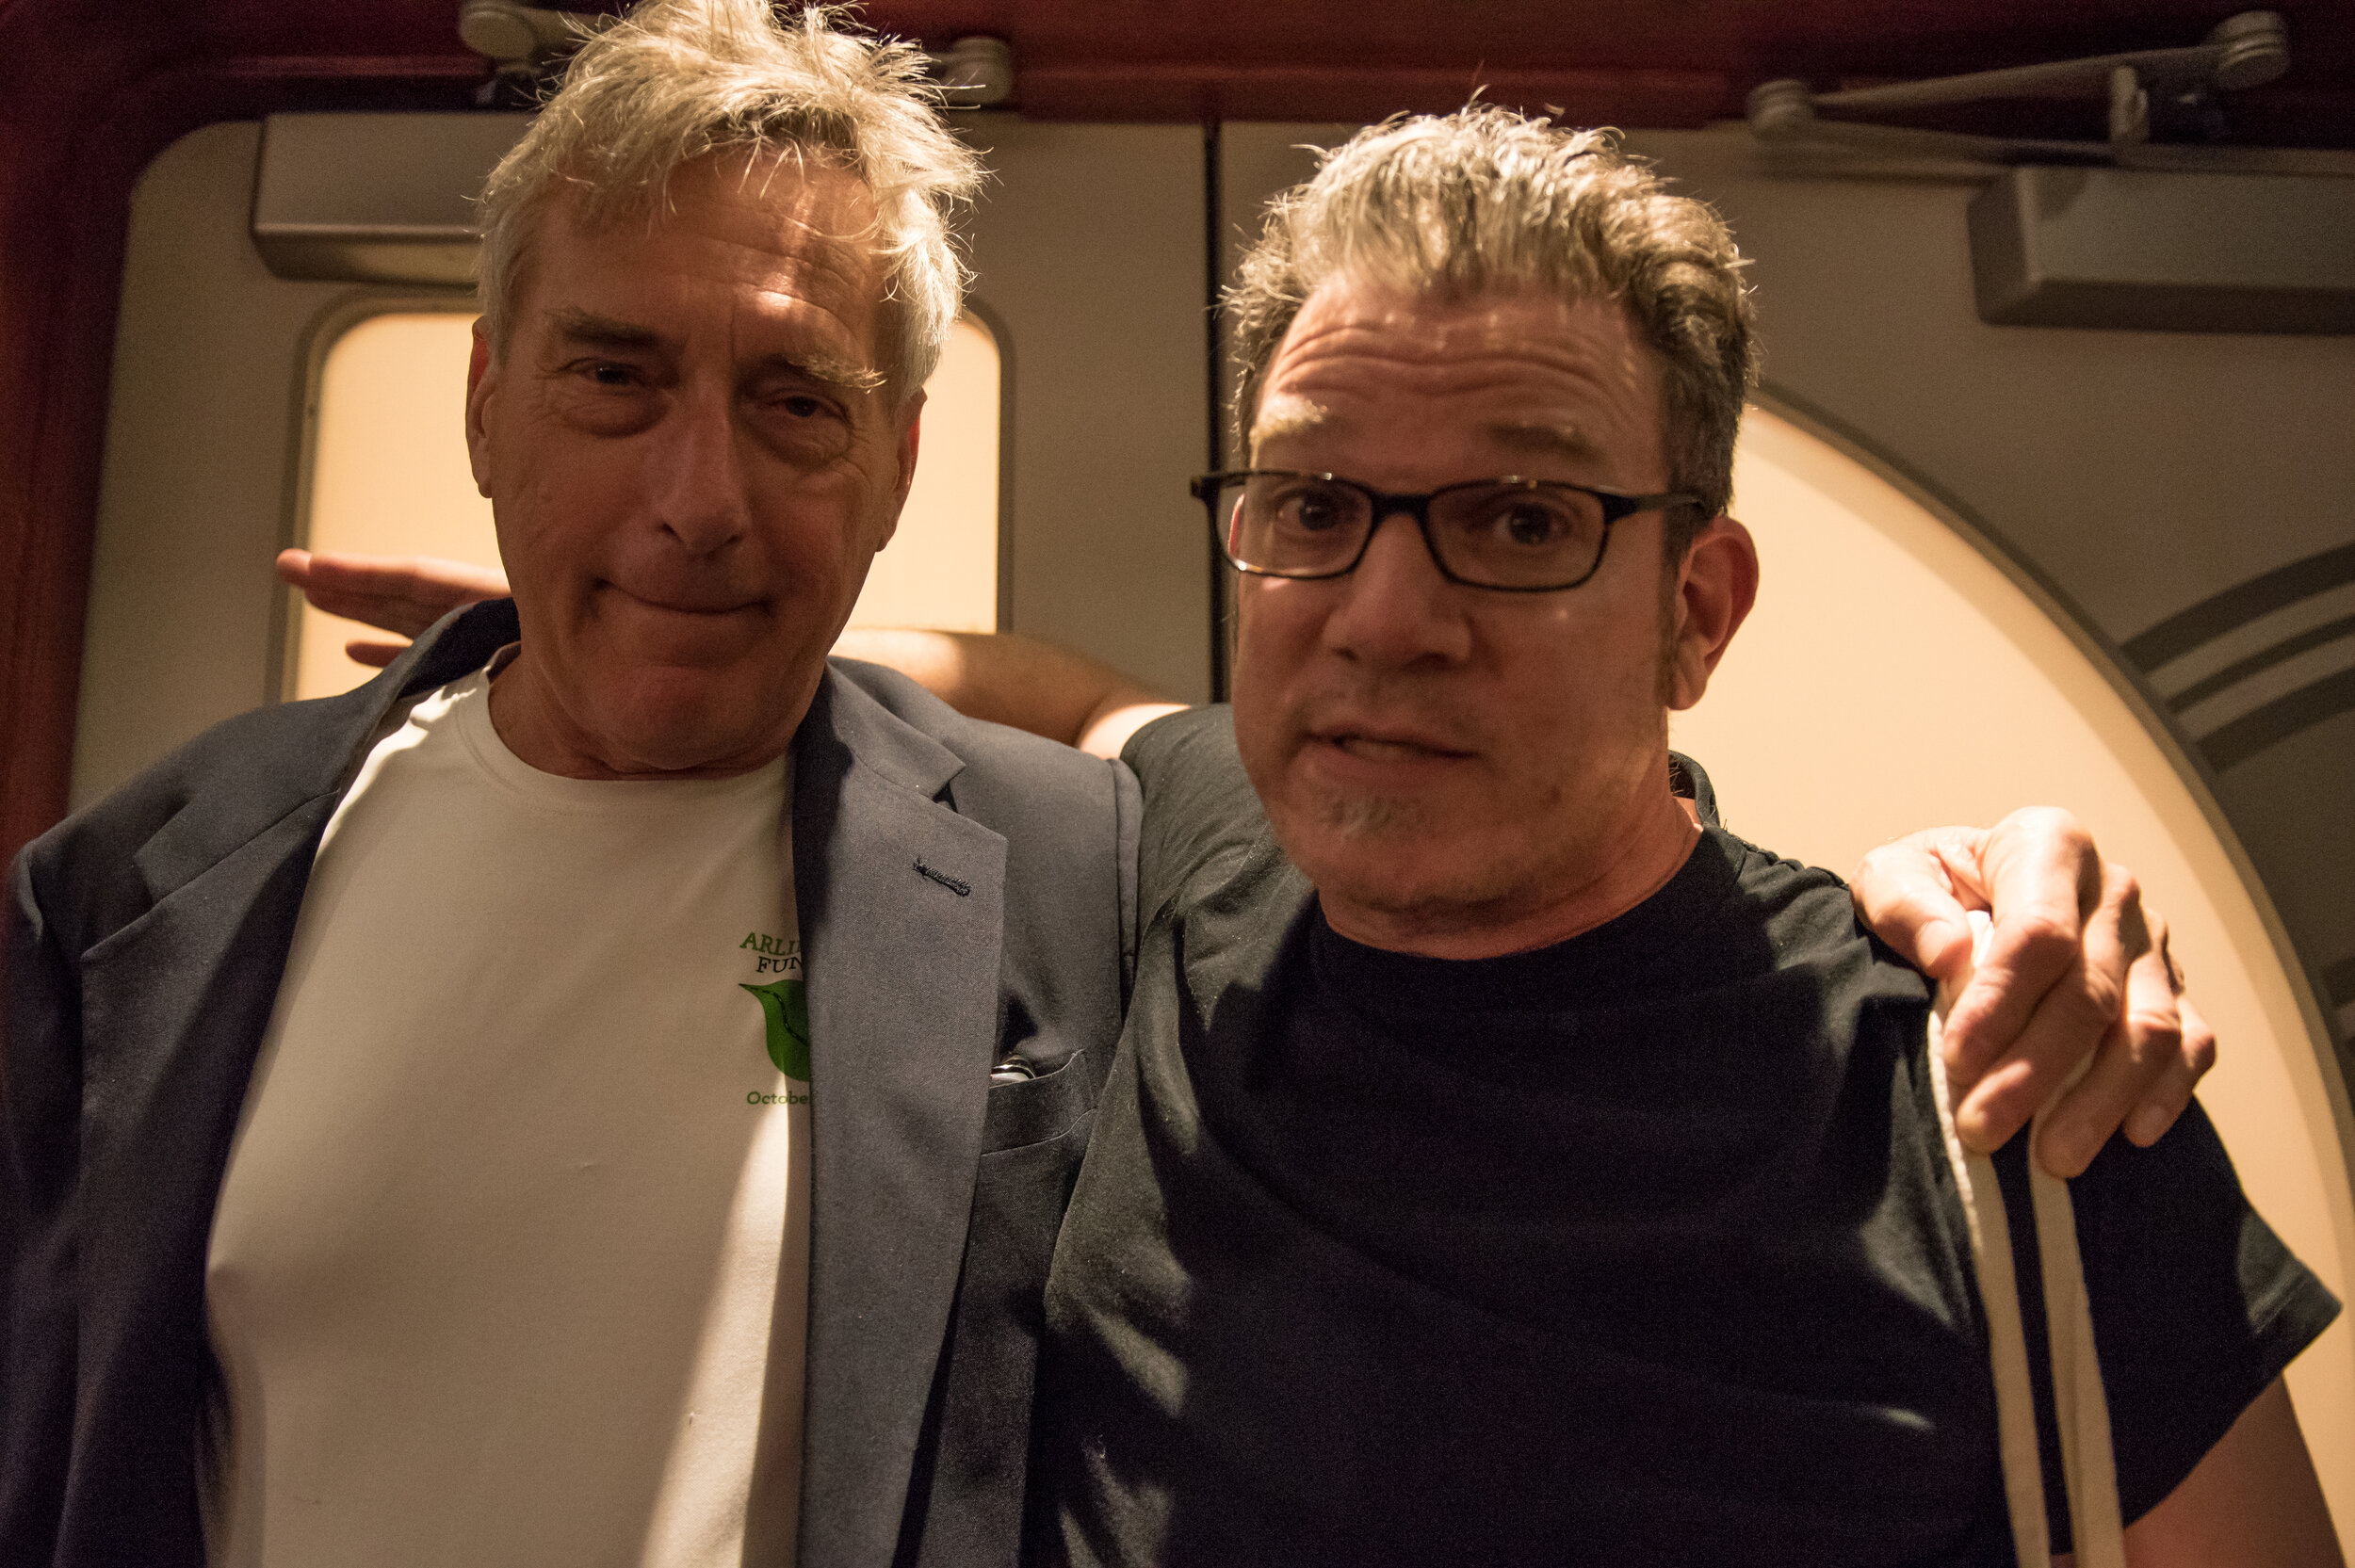  Don Zeintara (Inner Ear Recording Studio) and Geoff Turner (Gray Matter) at  the film’s World Premiere at the American Film Institute. Photo by Nalinee Darmrong. 